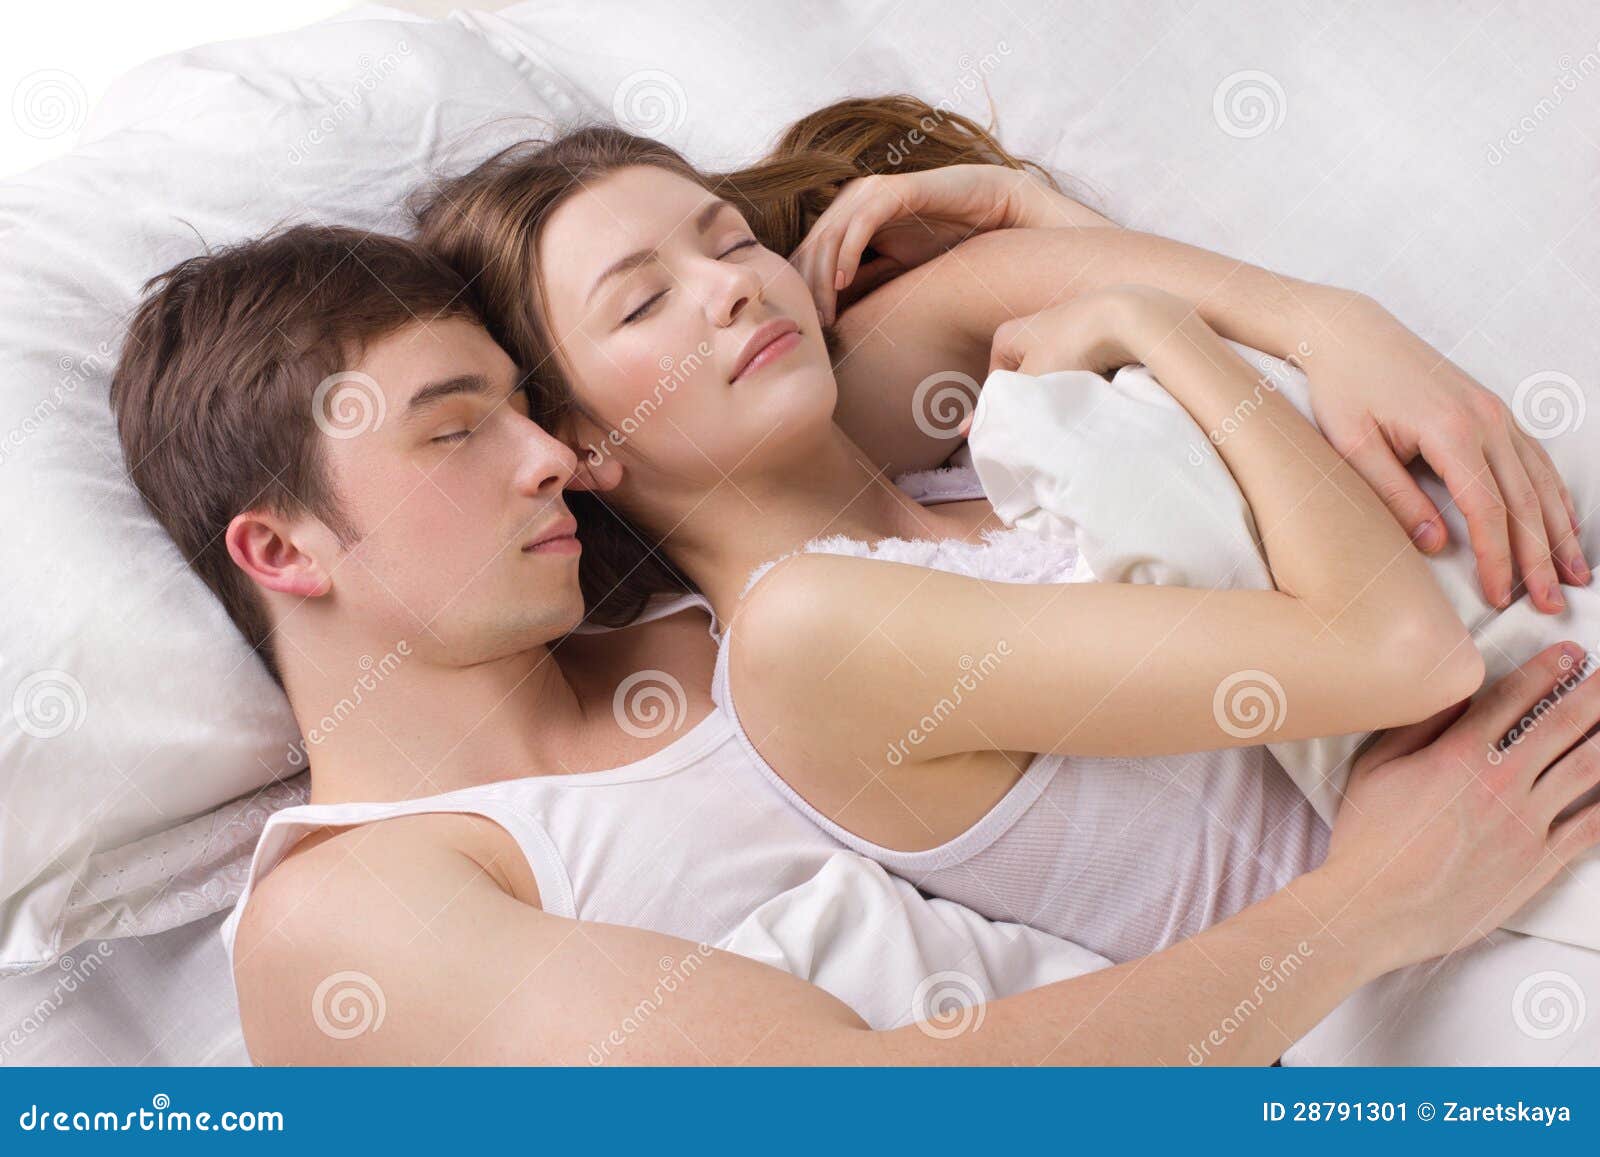 Man And Woman In The Bed 13